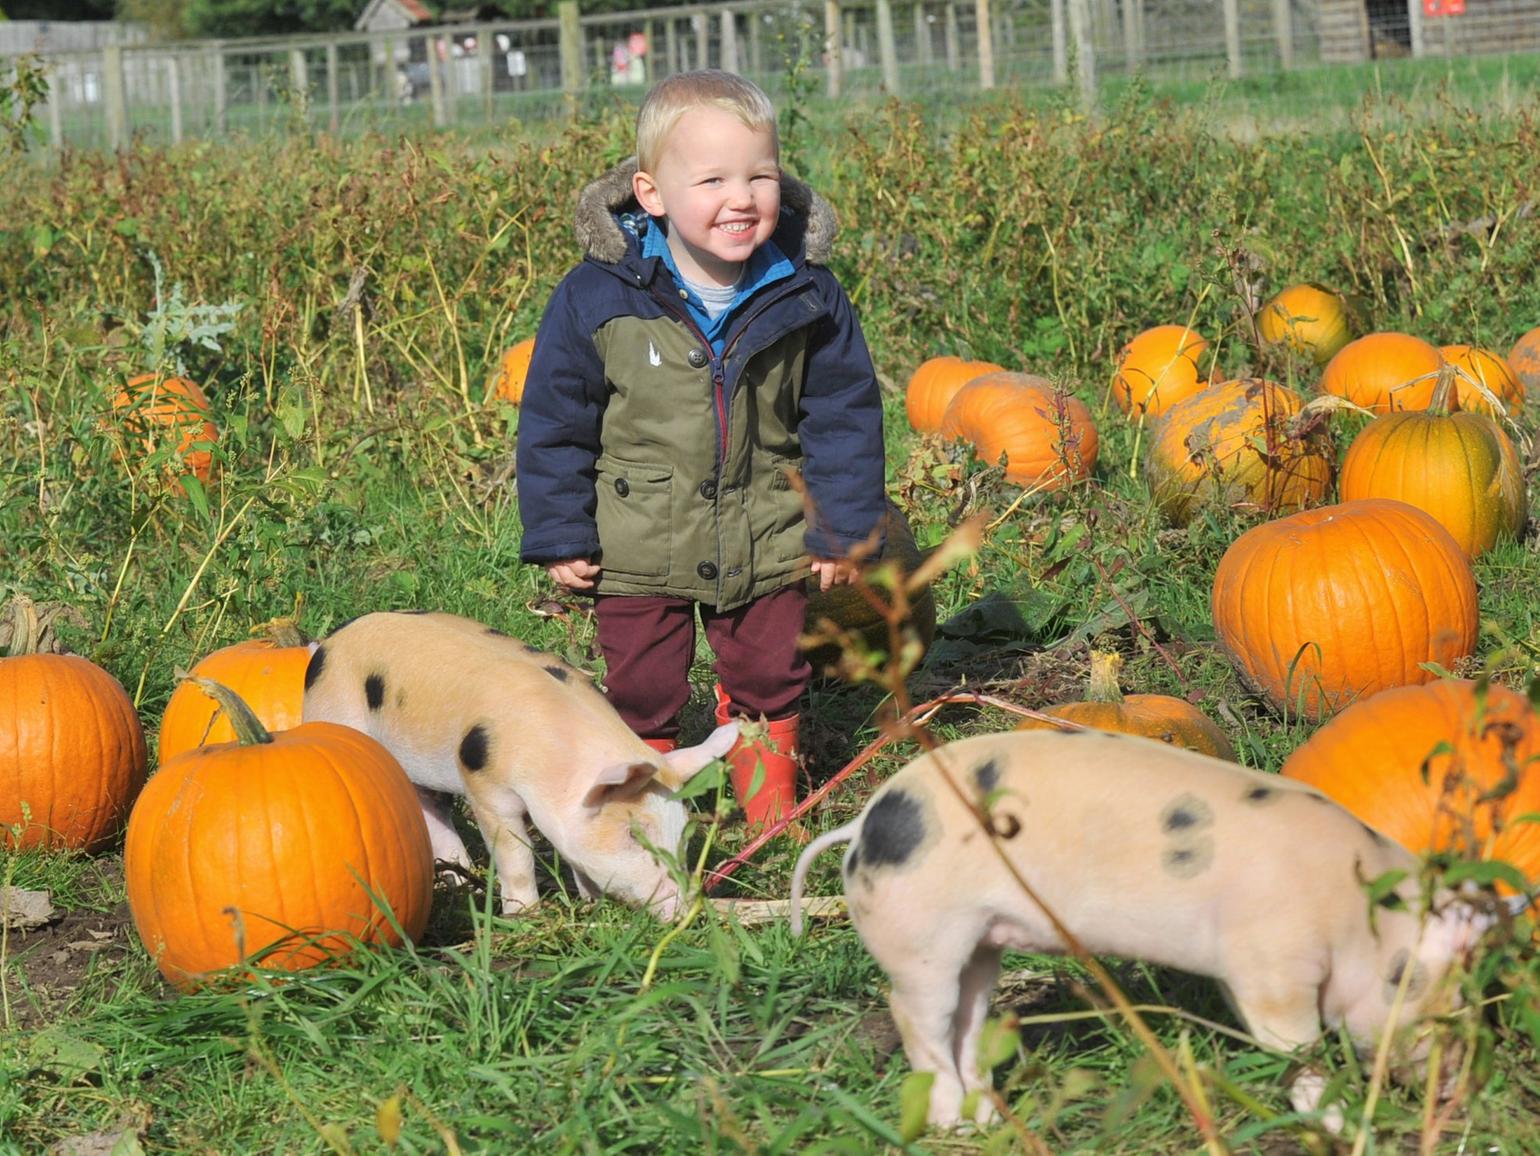 Winston Larkin, aged 3, at Piglets Adventure Farm at Towthorpe, YO32 9ST (open October weekends, plus daily October 28 - November 3, 10am-5.30pm, booking required)